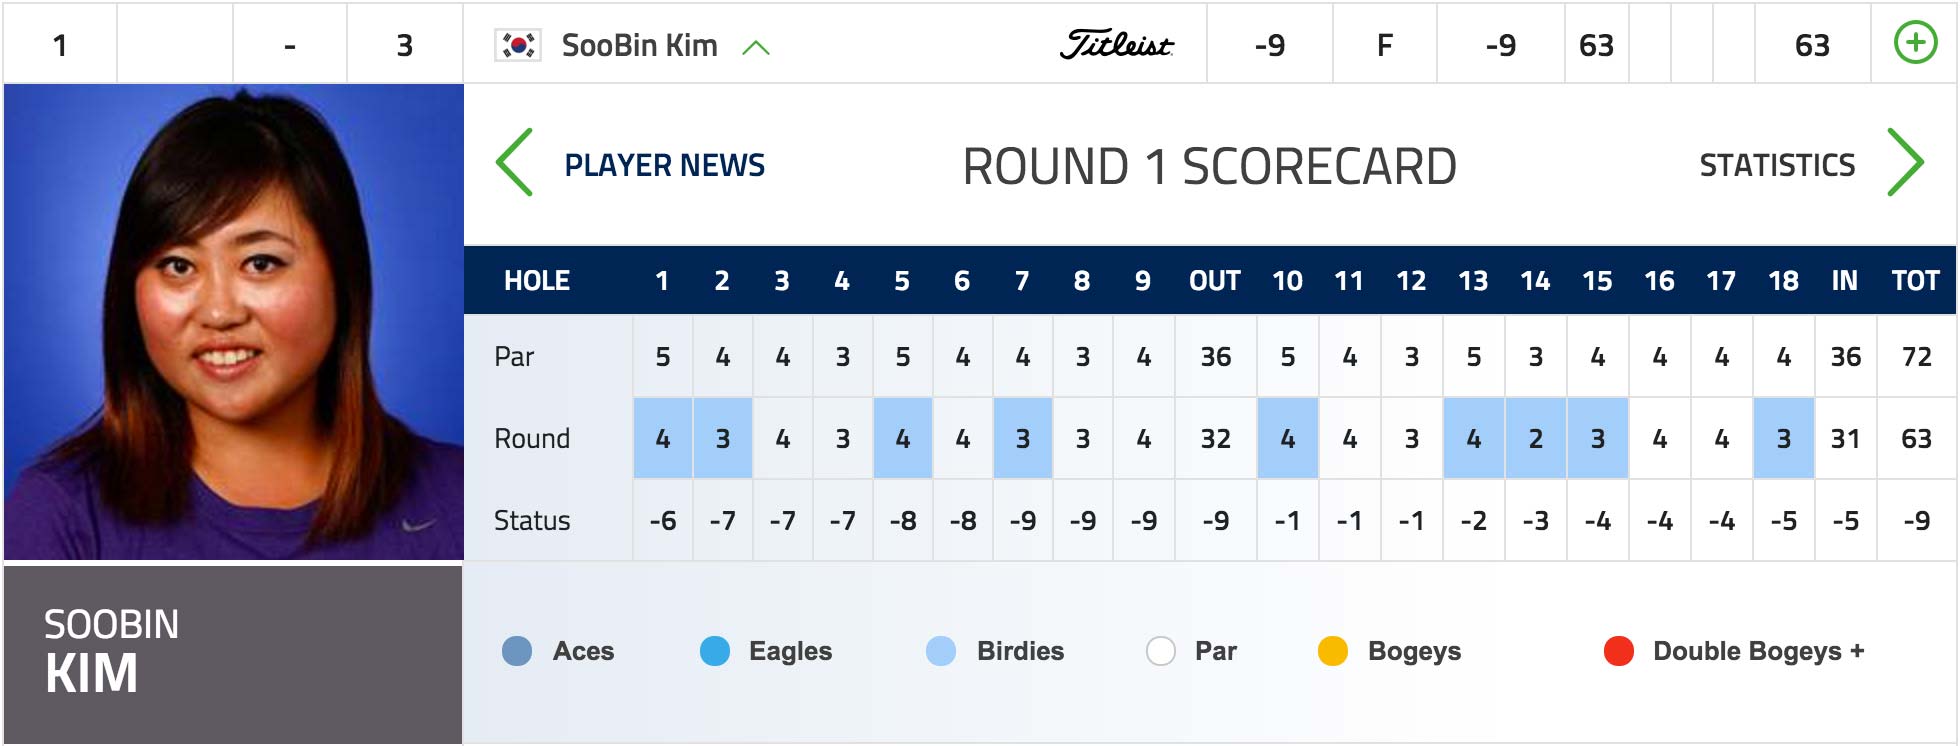 SooBin Kim Sets Course Record with 63 in opening round of 2016 ISPS Handa Women's Australian Open